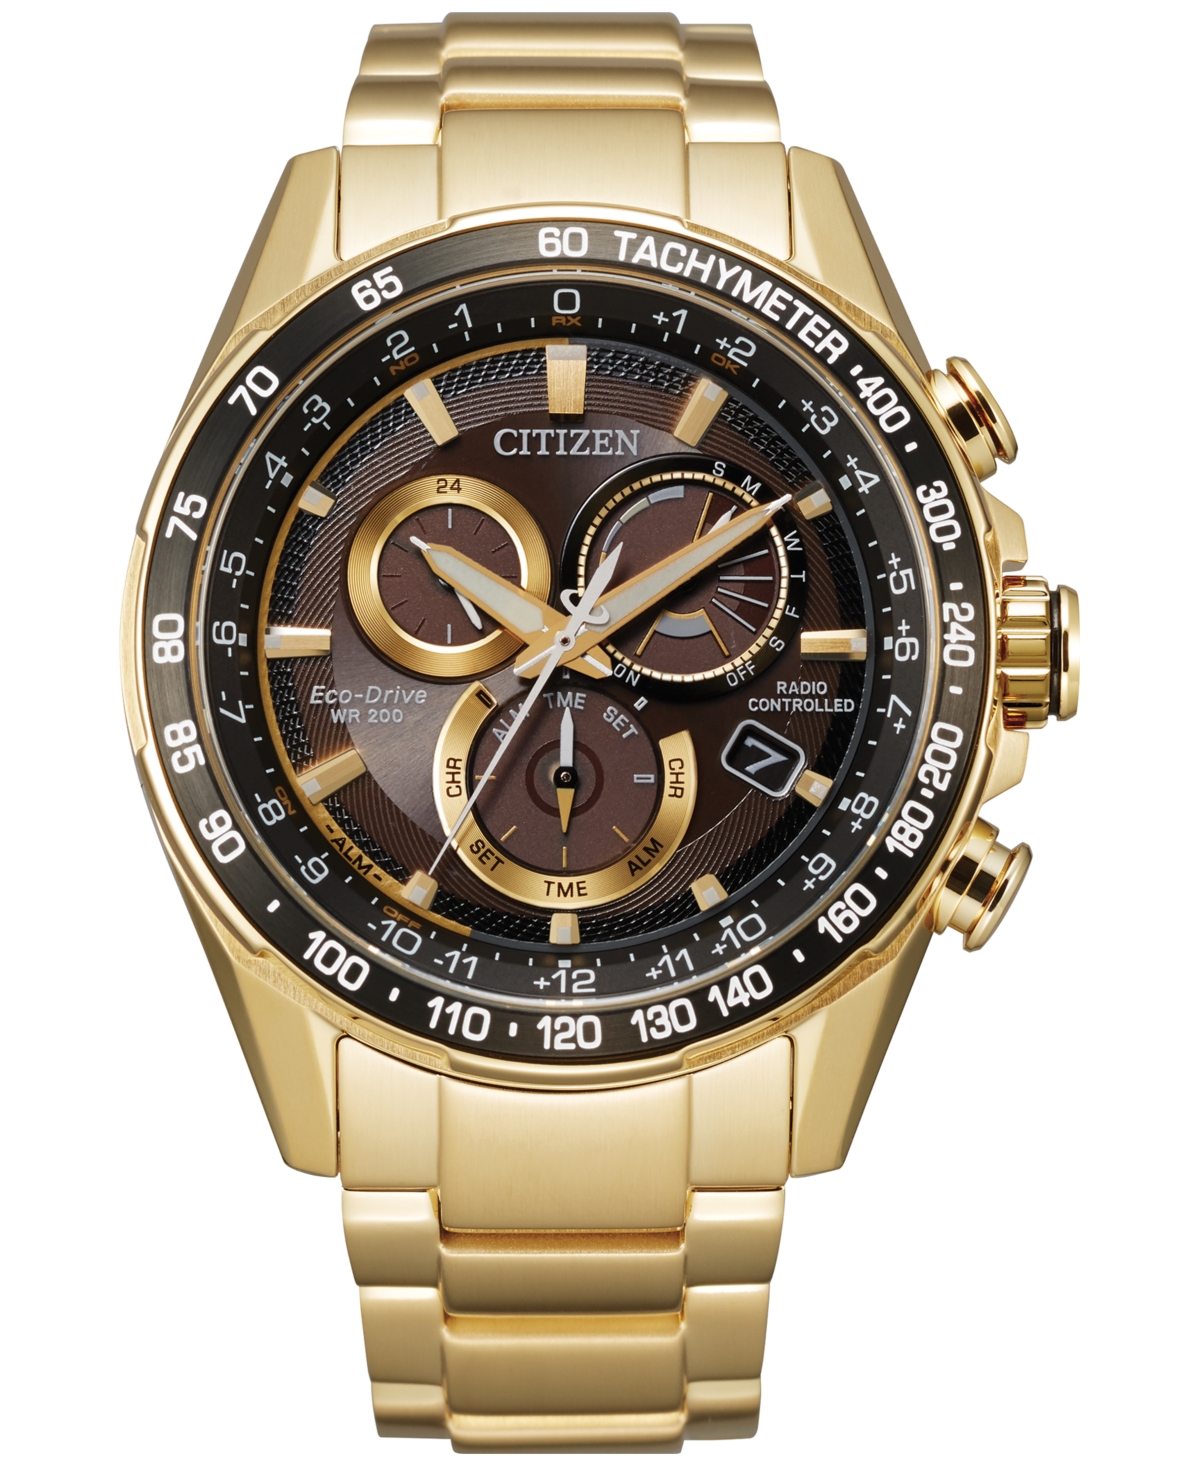 Citizen Eco-Drive Men's Chronograph PCAT Gold-Tone Stainless Steel Bracelet  Watch 43mm & Reviews - All Watches - Jewelry & Watches - Macy's